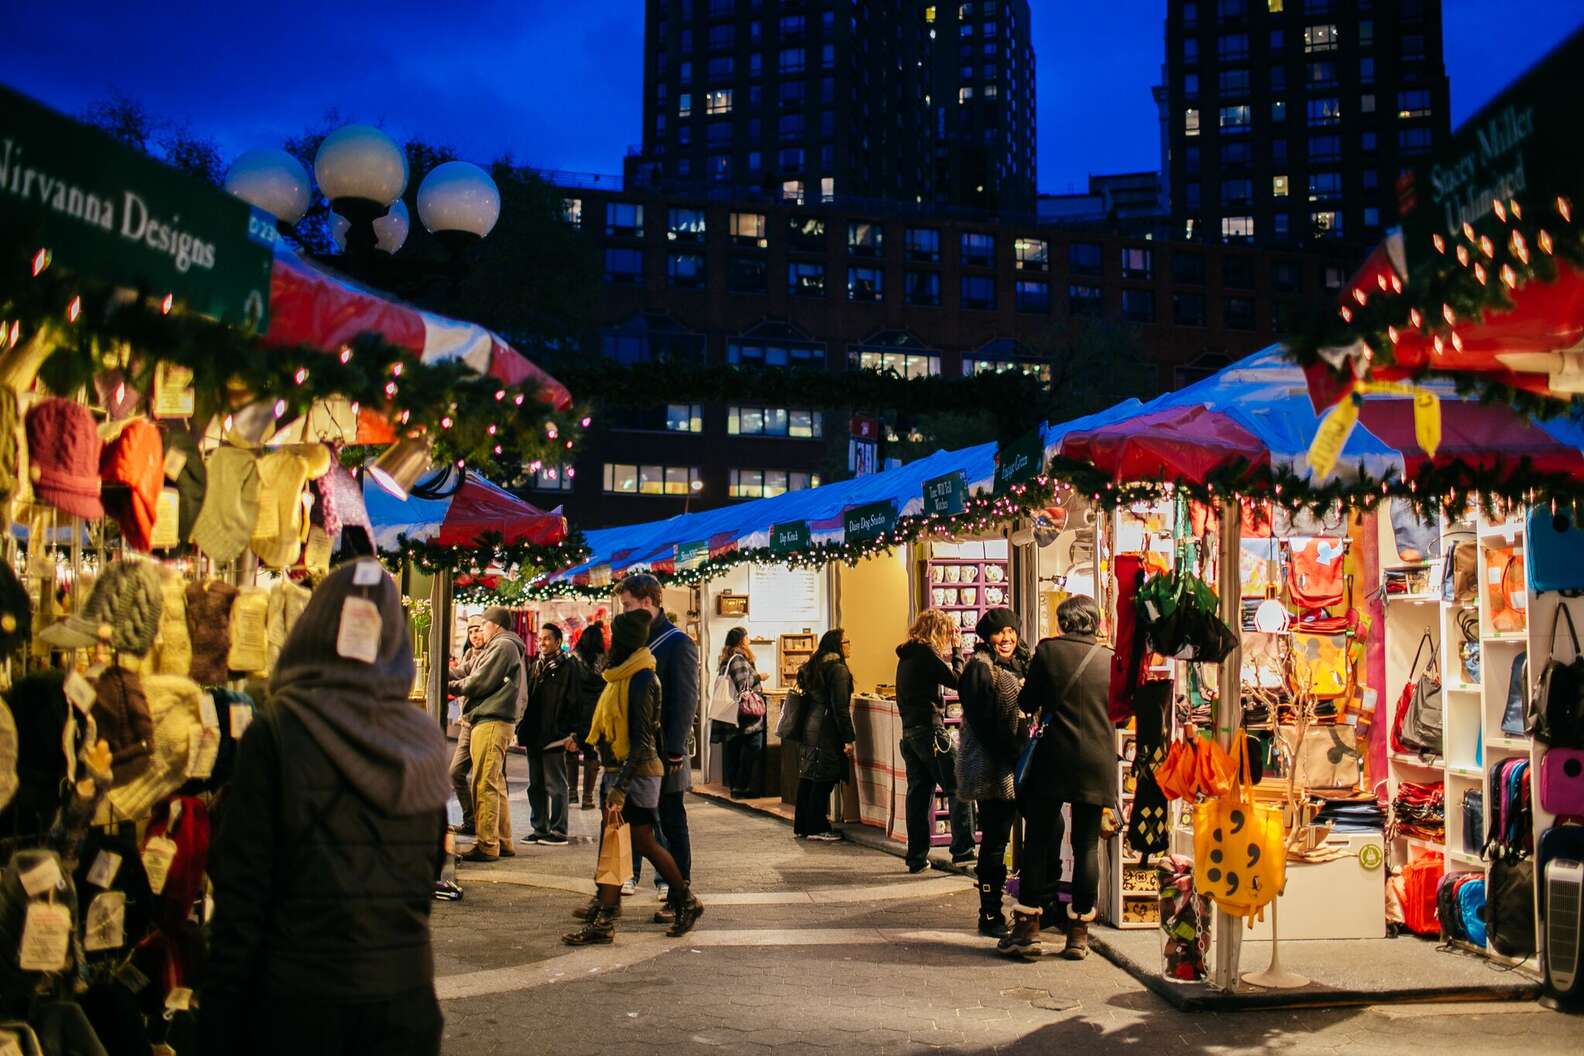 NYC Winter Events Calendar What to Do This Winter in New York City